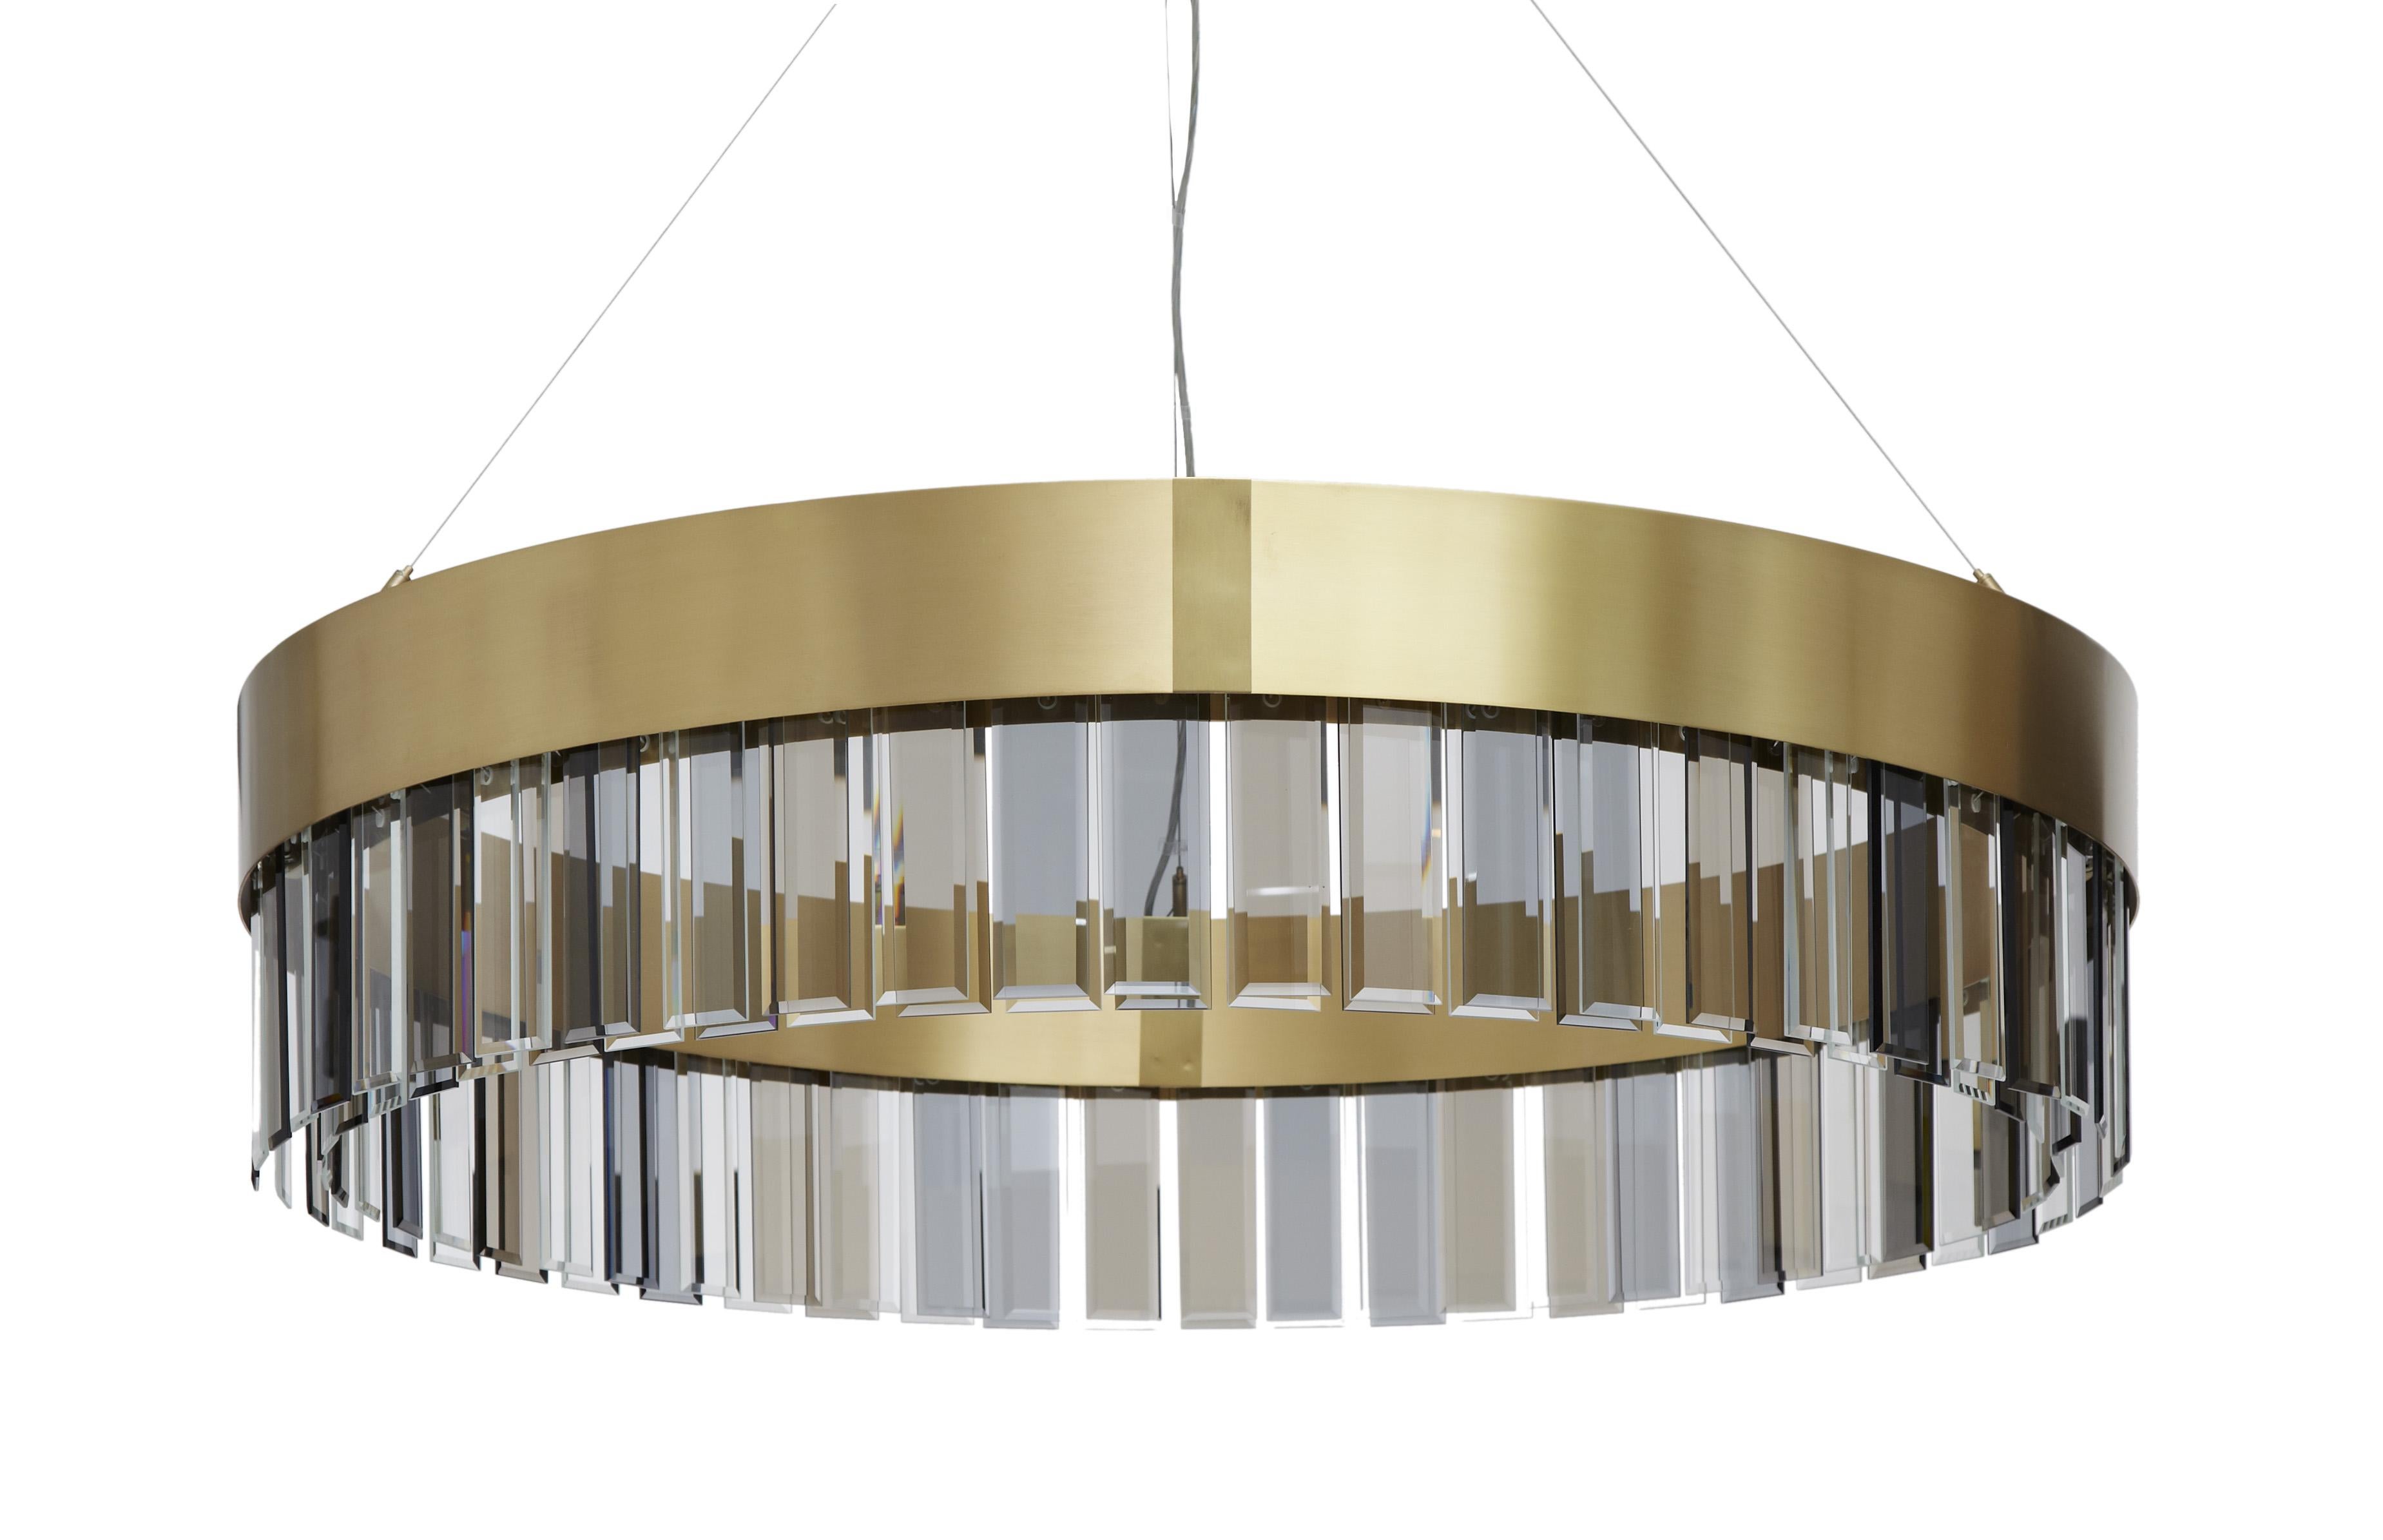 Solaris 1100 pendant by CTO Lighting
Materials: Satin brass with cut glass drops and stainless steel suspension wire/clear flex
Dimensions: H 25 x W 110 cm 

All our lamps can be wired according to each country. If sold to the USA it will be